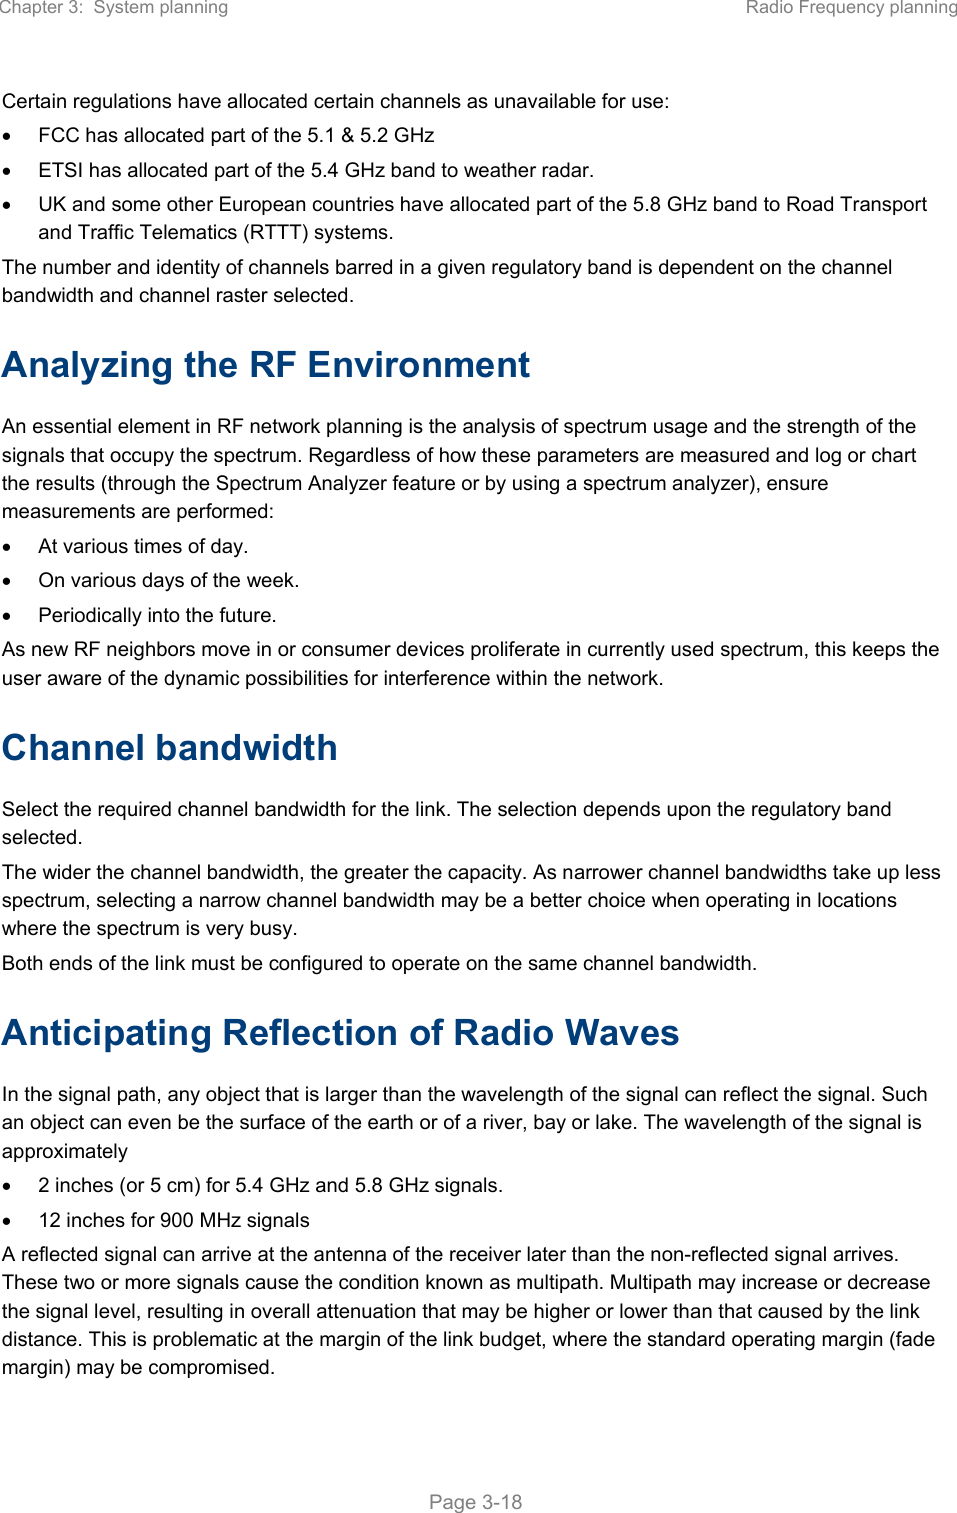 Chapter 3:  System planning  Radio Frequency planning   Page 3-18 Certain regulations have allocated certain channels as unavailable for use:   FCC has allocated part of the 5.1 &amp; 5.2 GHz   ETSI has allocated part of the 5.4 GHz band to weather radar.   UK and some other European countries have allocated part of the 5.8 GHz band to Road Transport and Traffic Telematics (RTTT) systems. The number and identity of channels barred in a given regulatory band is dependent on the channel bandwidth and channel raster selected. Analyzing the RF Environment An essential element in RF network planning is the analysis of spectrum usage and the strength of the signals that occupy the spectrum. Regardless of how these parameters are measured and log or chart the results (through the Spectrum Analyzer feature or by using a spectrum analyzer), ensure measurements are performed:   At various times of day.   On various days of the week.   Periodically into the future. As new RF neighbors move in or consumer devices proliferate in currently used spectrum, this keeps the user aware of the dynamic possibilities for interference within the network. Channel bandwidth Select the required channel bandwidth for the link. The selection depends upon the regulatory band selected.  The wider the channel bandwidth, the greater the capacity. As narrower channel bandwidths take up less spectrum, selecting a narrow channel bandwidth may be a better choice when operating in locations where the spectrum is very busy.  Both ends of the link must be configured to operate on the same channel bandwidth. Anticipating Reflection of Radio Waves In the signal path, any object that is larger than the wavelength of the signal can reflect the signal. Such an object can even be the surface of the earth or of a river, bay or lake. The wavelength of the signal is approximately   2 inches (or 5 cm) for 5.4 GHz and 5.8 GHz signals.   12 inches for 900 MHz signals A reflected signal can arrive at the antenna of the receiver later than the non-reflected signal arrives. These two or more signals cause the condition known as multipath. Multipath may increase or decrease the signal level, resulting in overall attenuation that may be higher or lower than that caused by the link distance. This is problematic at the margin of the link budget, where the standard operating margin (fade margin) may be compromised. 